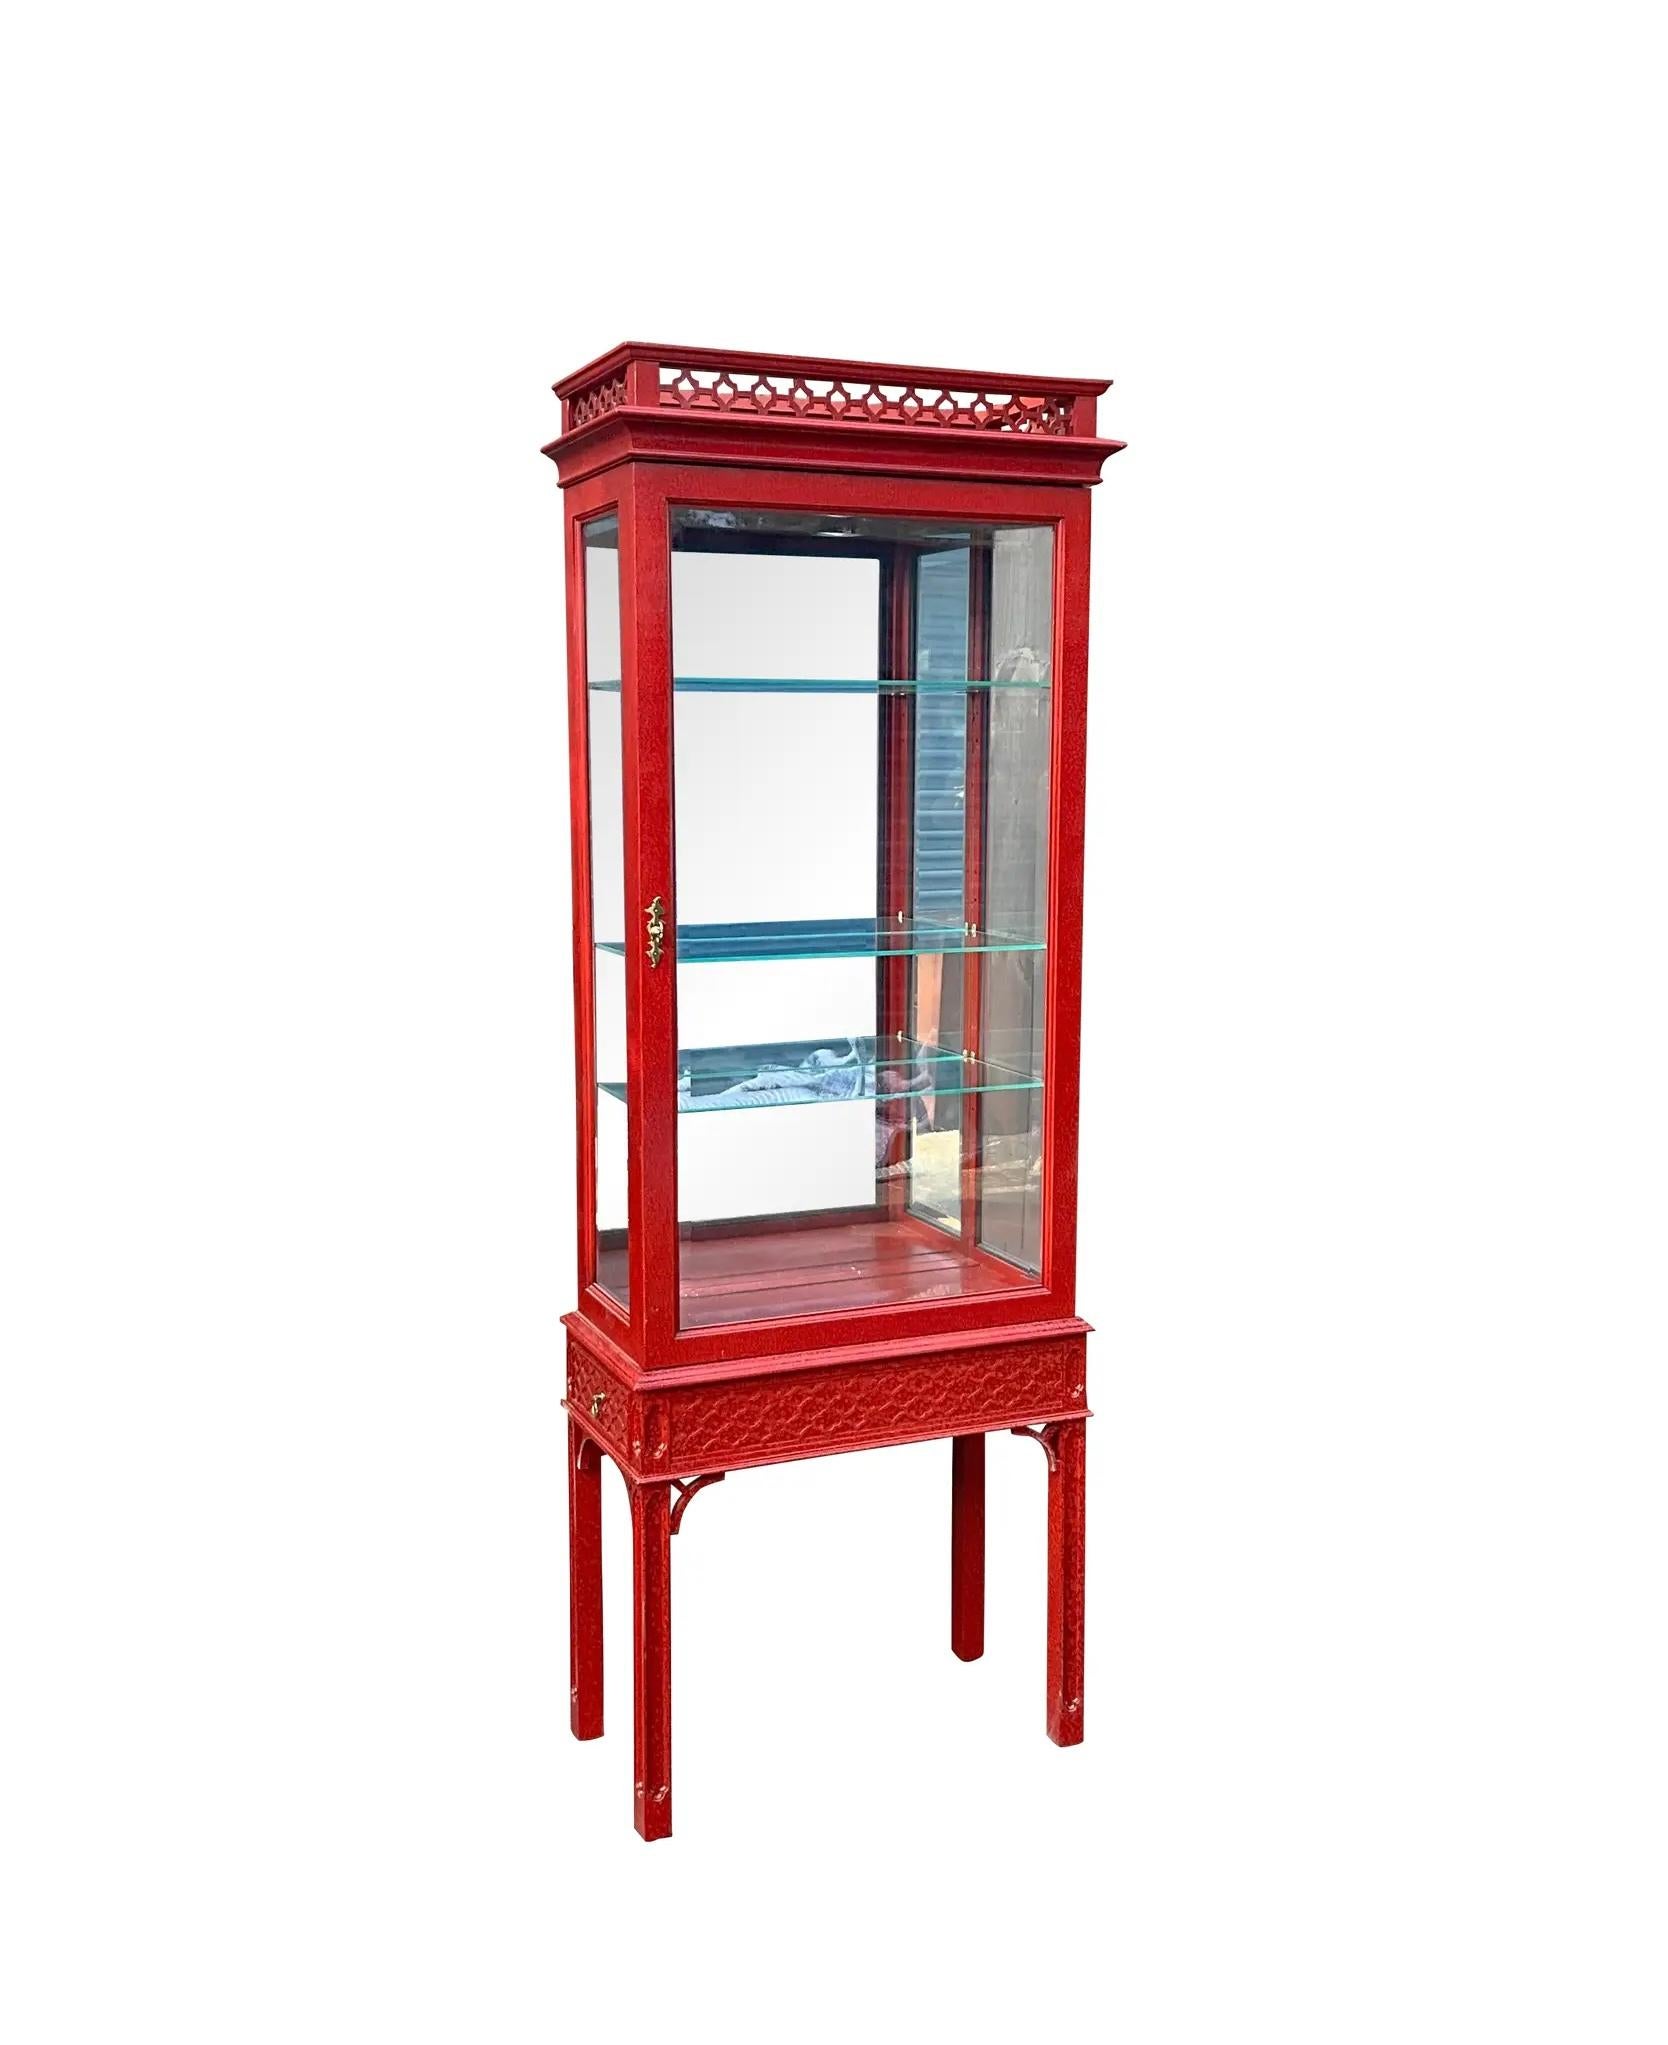 From plates to cosmetics to jewelry, make your special things stand out in these beautiful display pieces by Century Furniture. They have Chinese Chippendale styling and a two tone Chinese red painted finish with carved fretwork throughout each